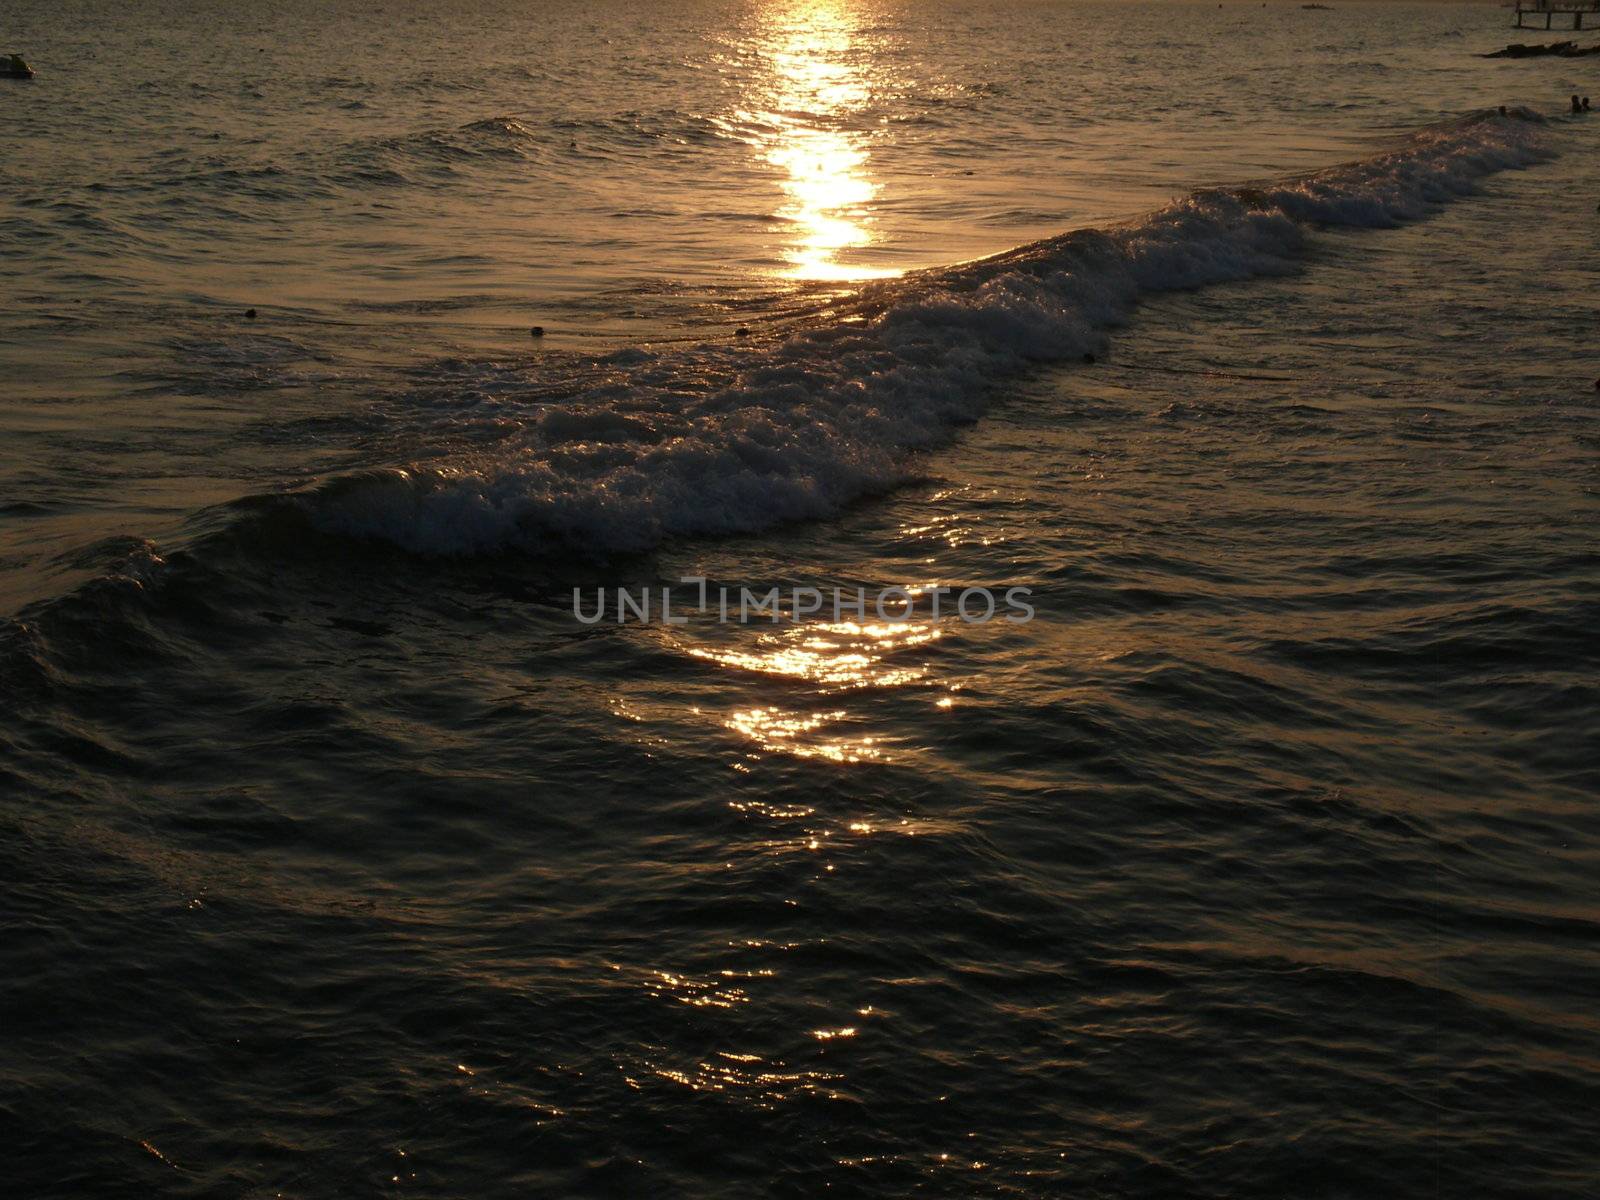 Reglection of a sun in the waves